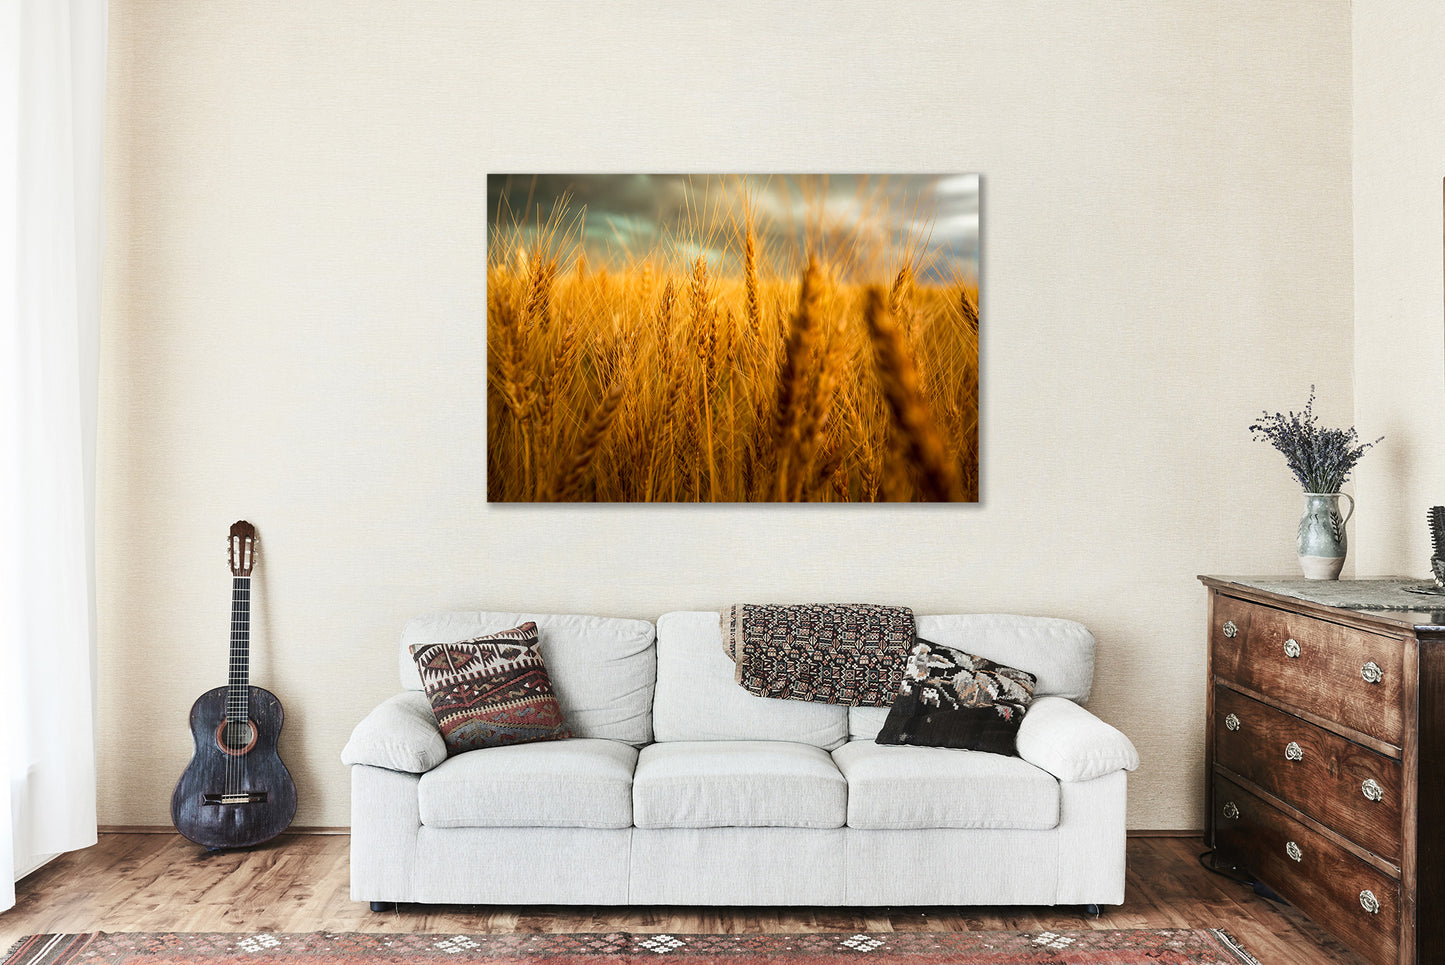 Farm Canvas Wall Art - Gallery Wrap of Golden Wheat at Harvest Time in Colorado - Country Farmhouse Photography Artwork Photo Decor